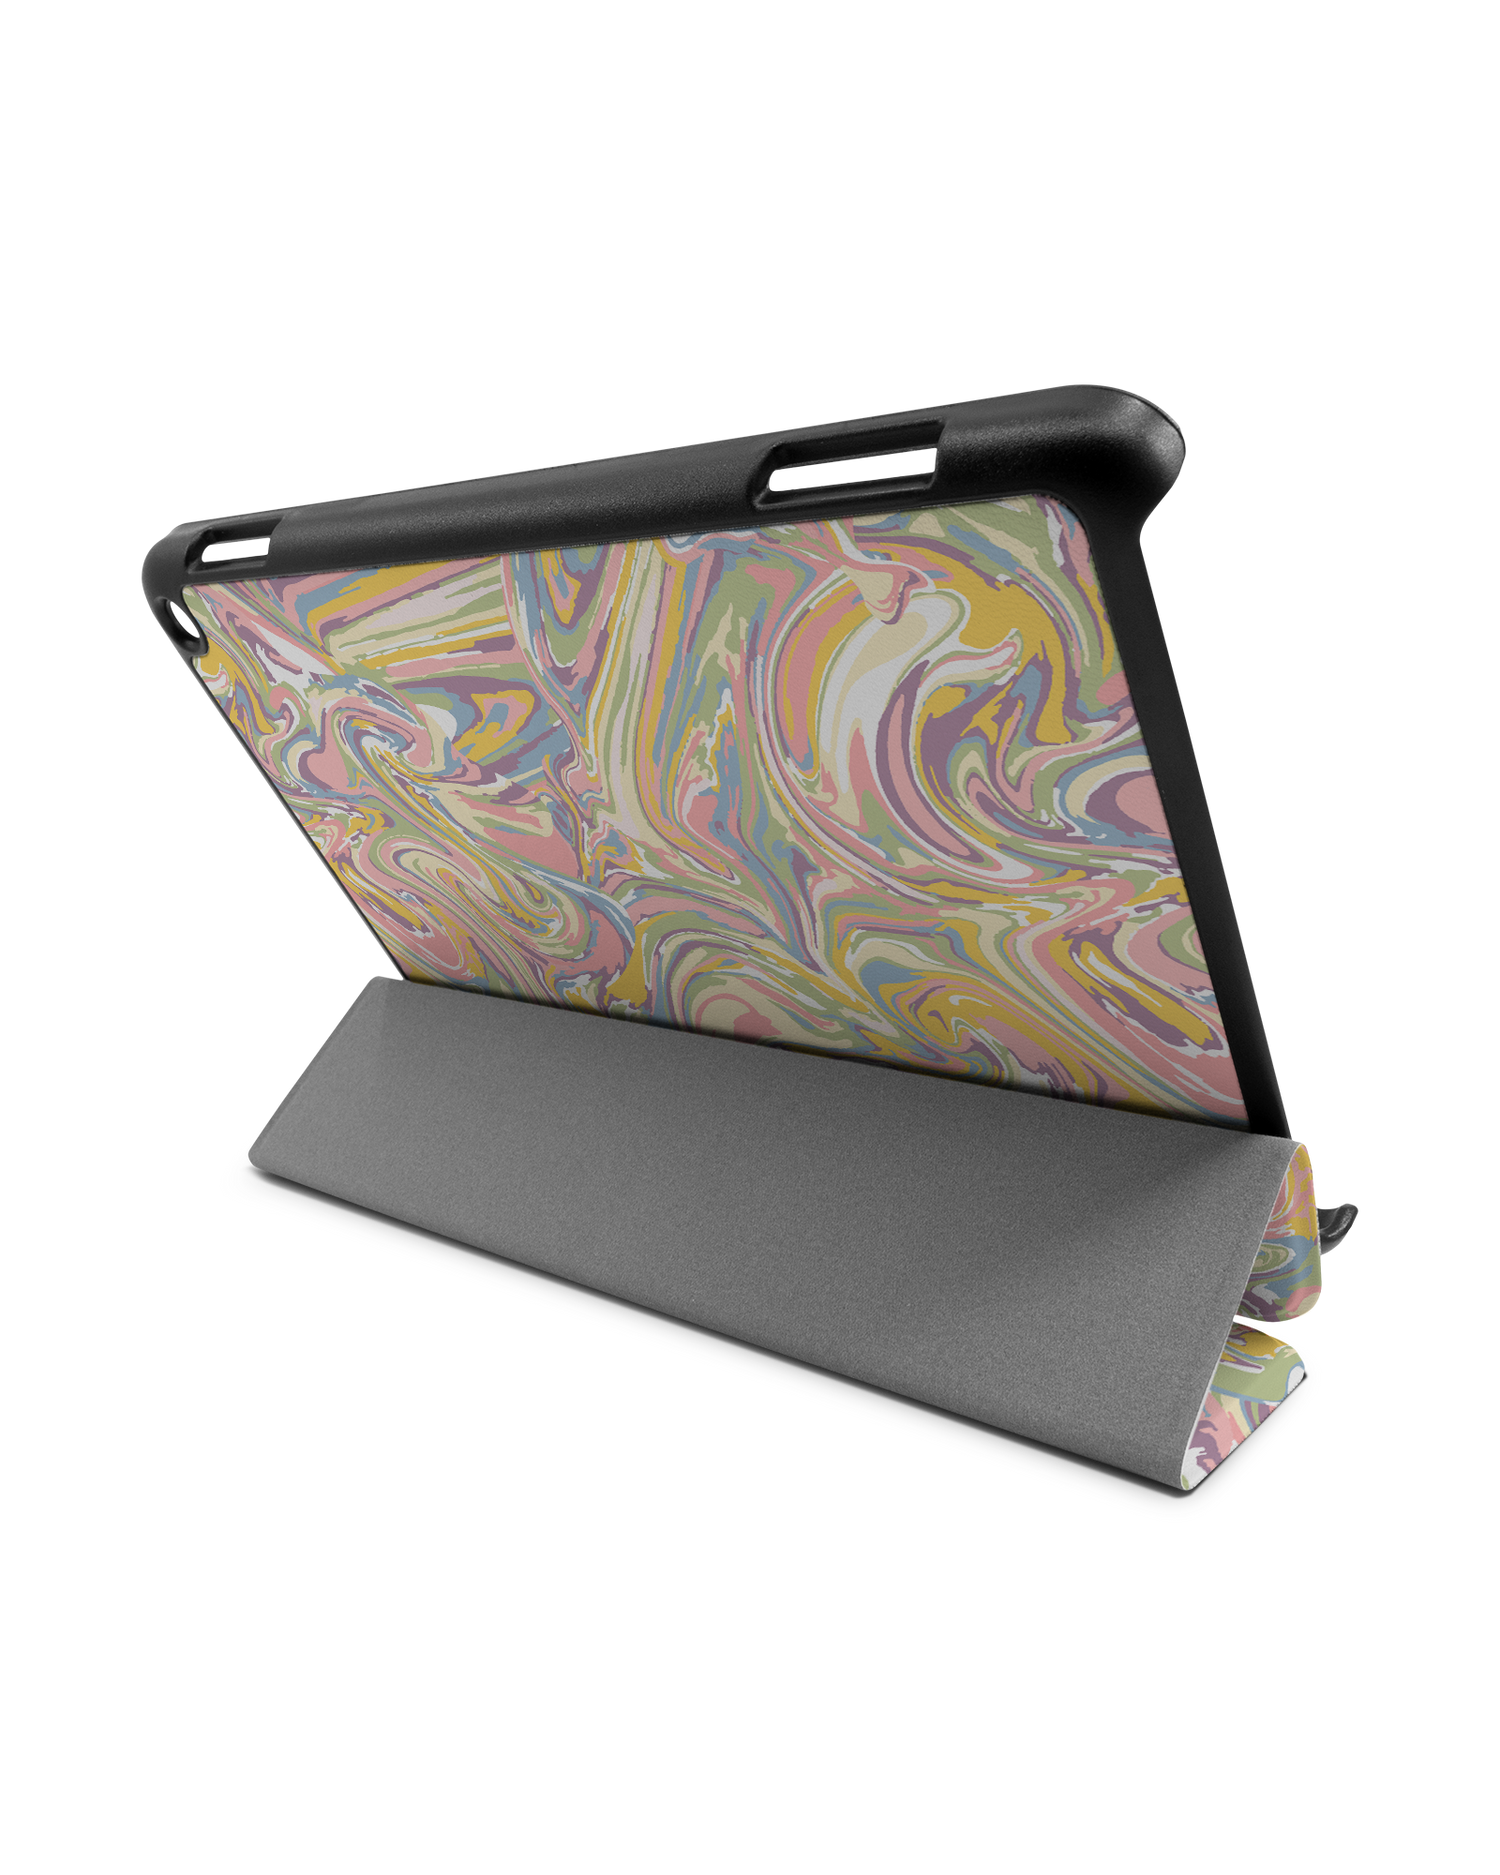 Psychedelic Optics Tablet Smart Case for Amazon Fire HD 8 (2022), Amazon Fire HD 8 Plus (2022), Amazon Fire HD 8 (2020), Amazon Fire HD 8 Plus (2020): Used as Stand